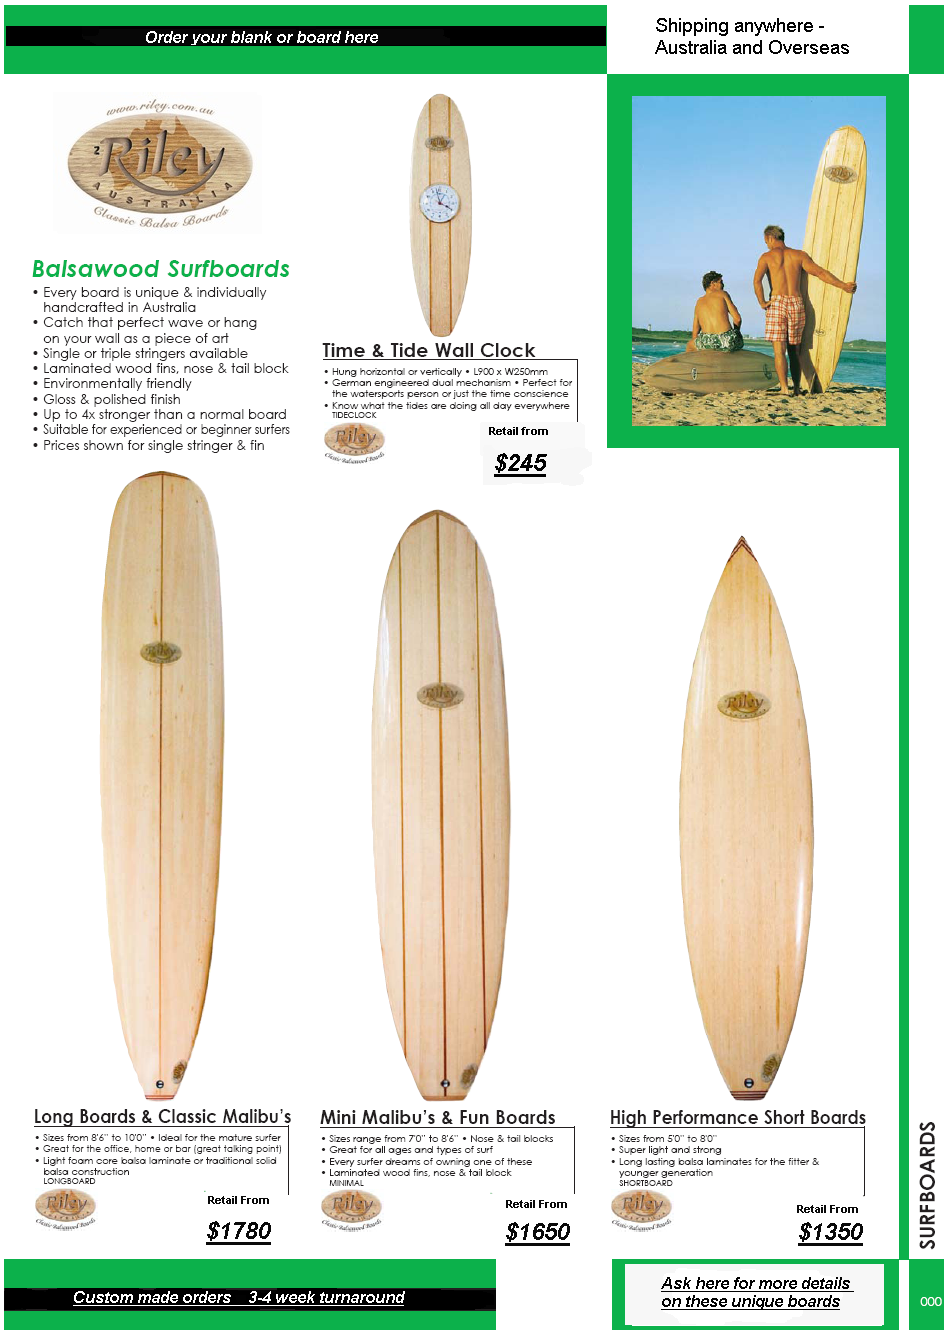 Summer is coming - check out the new SUP!!